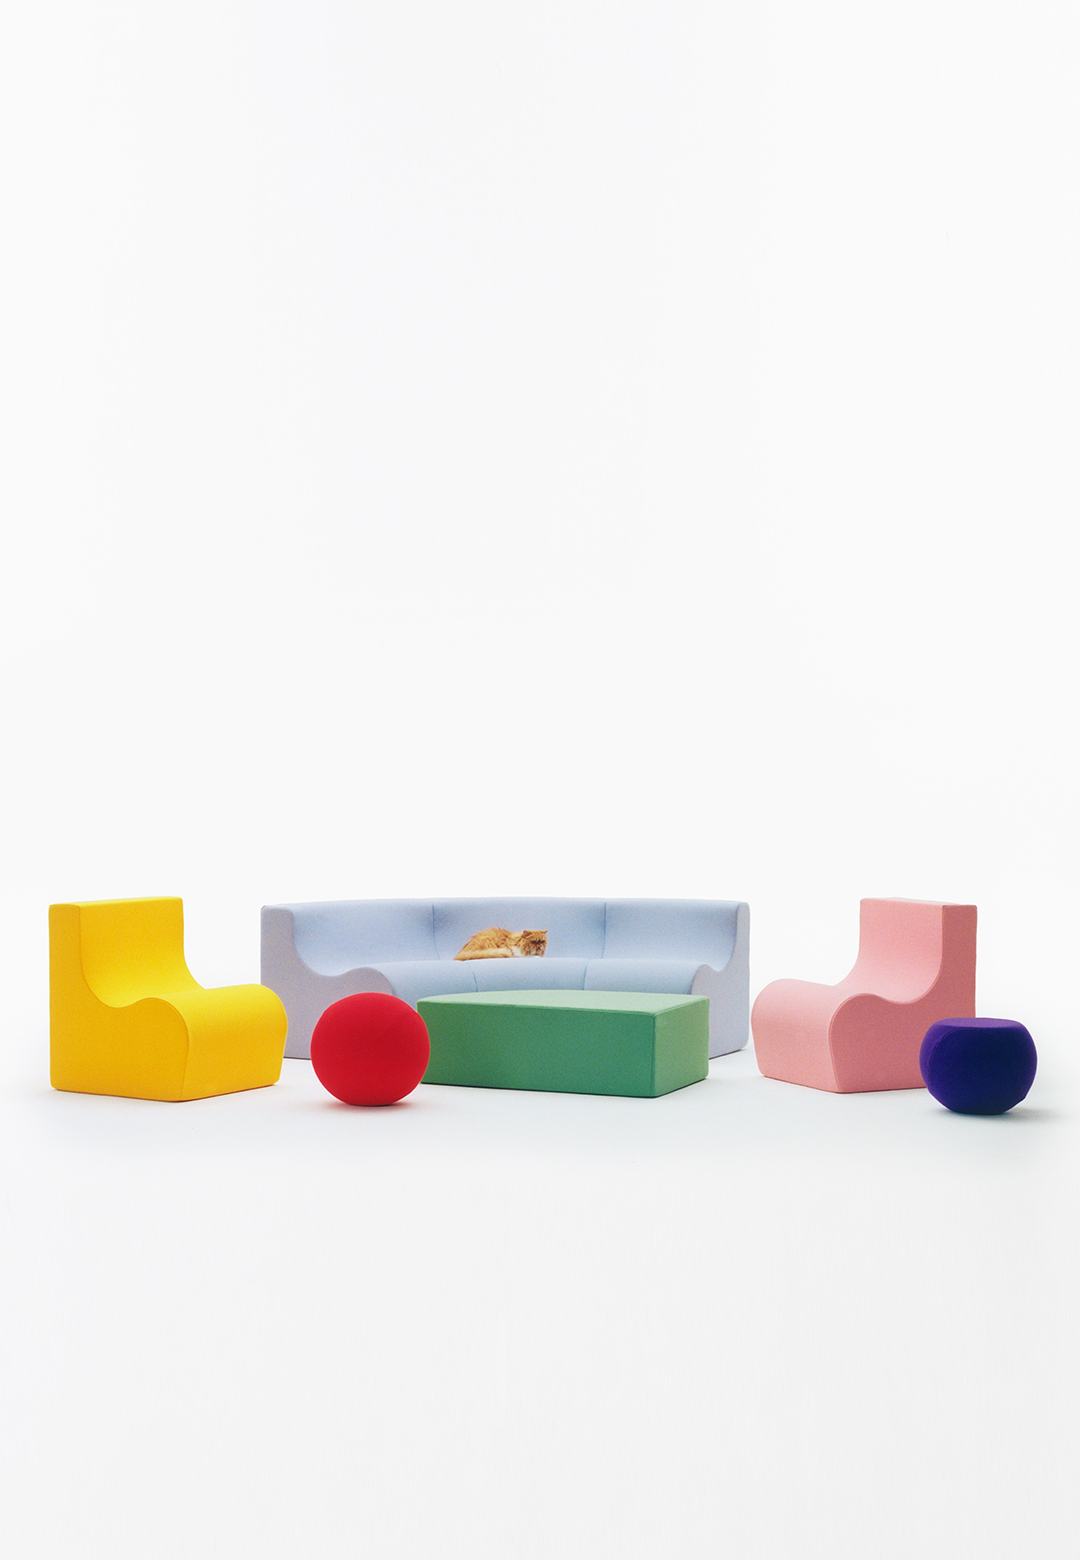 'FAMILY' by nara is an art furniture collection that invites users to collaborate and create